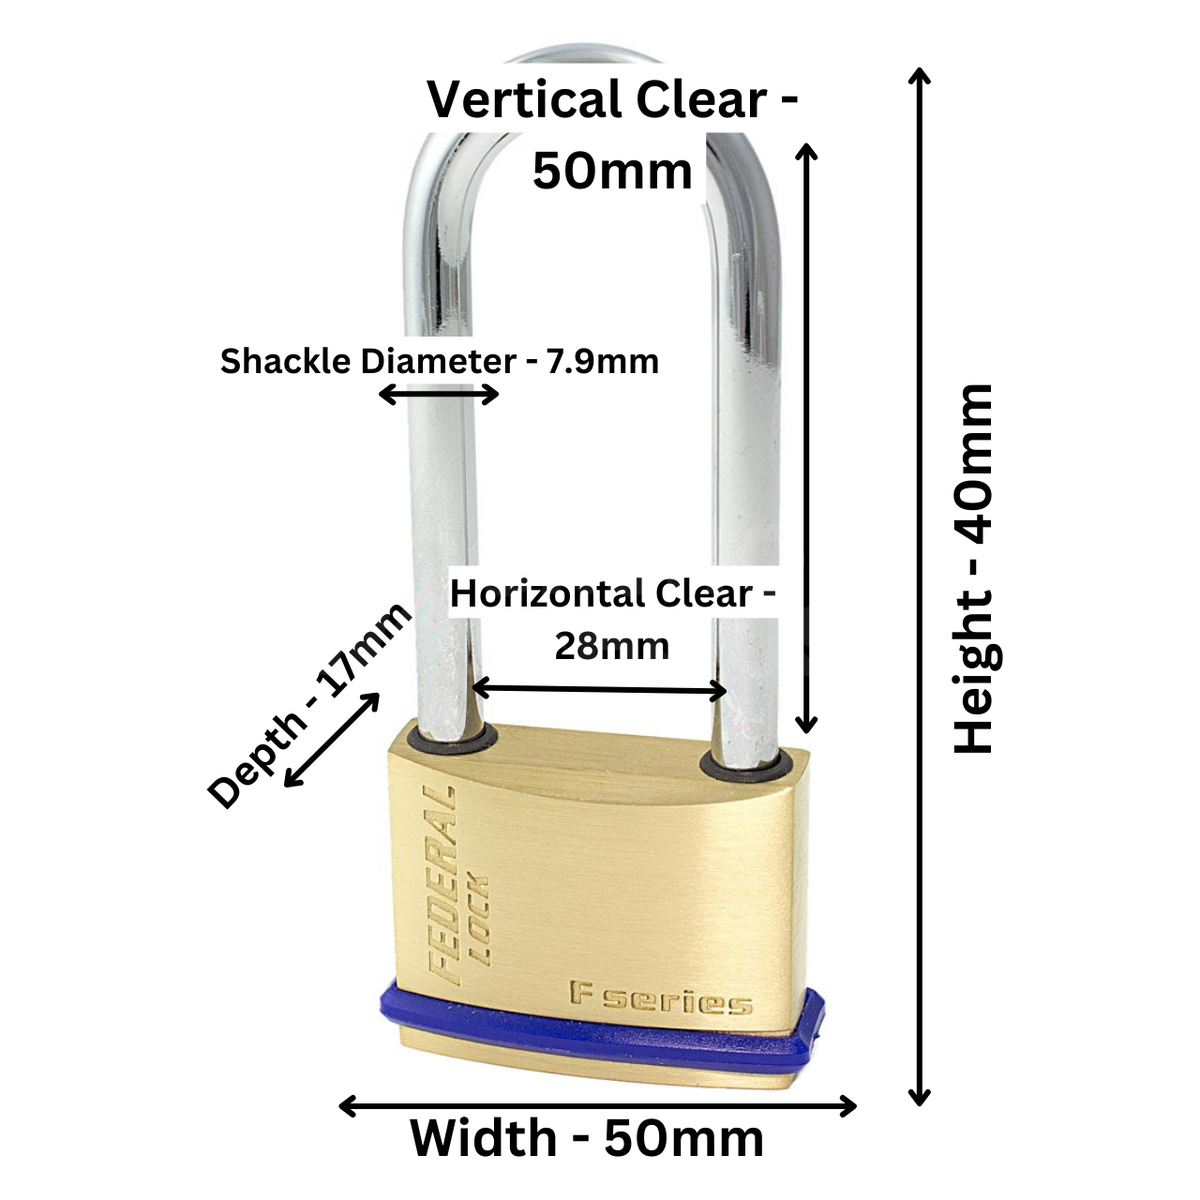 Dimensions Image: Federal 50mm Brass Padlock Long Shackle